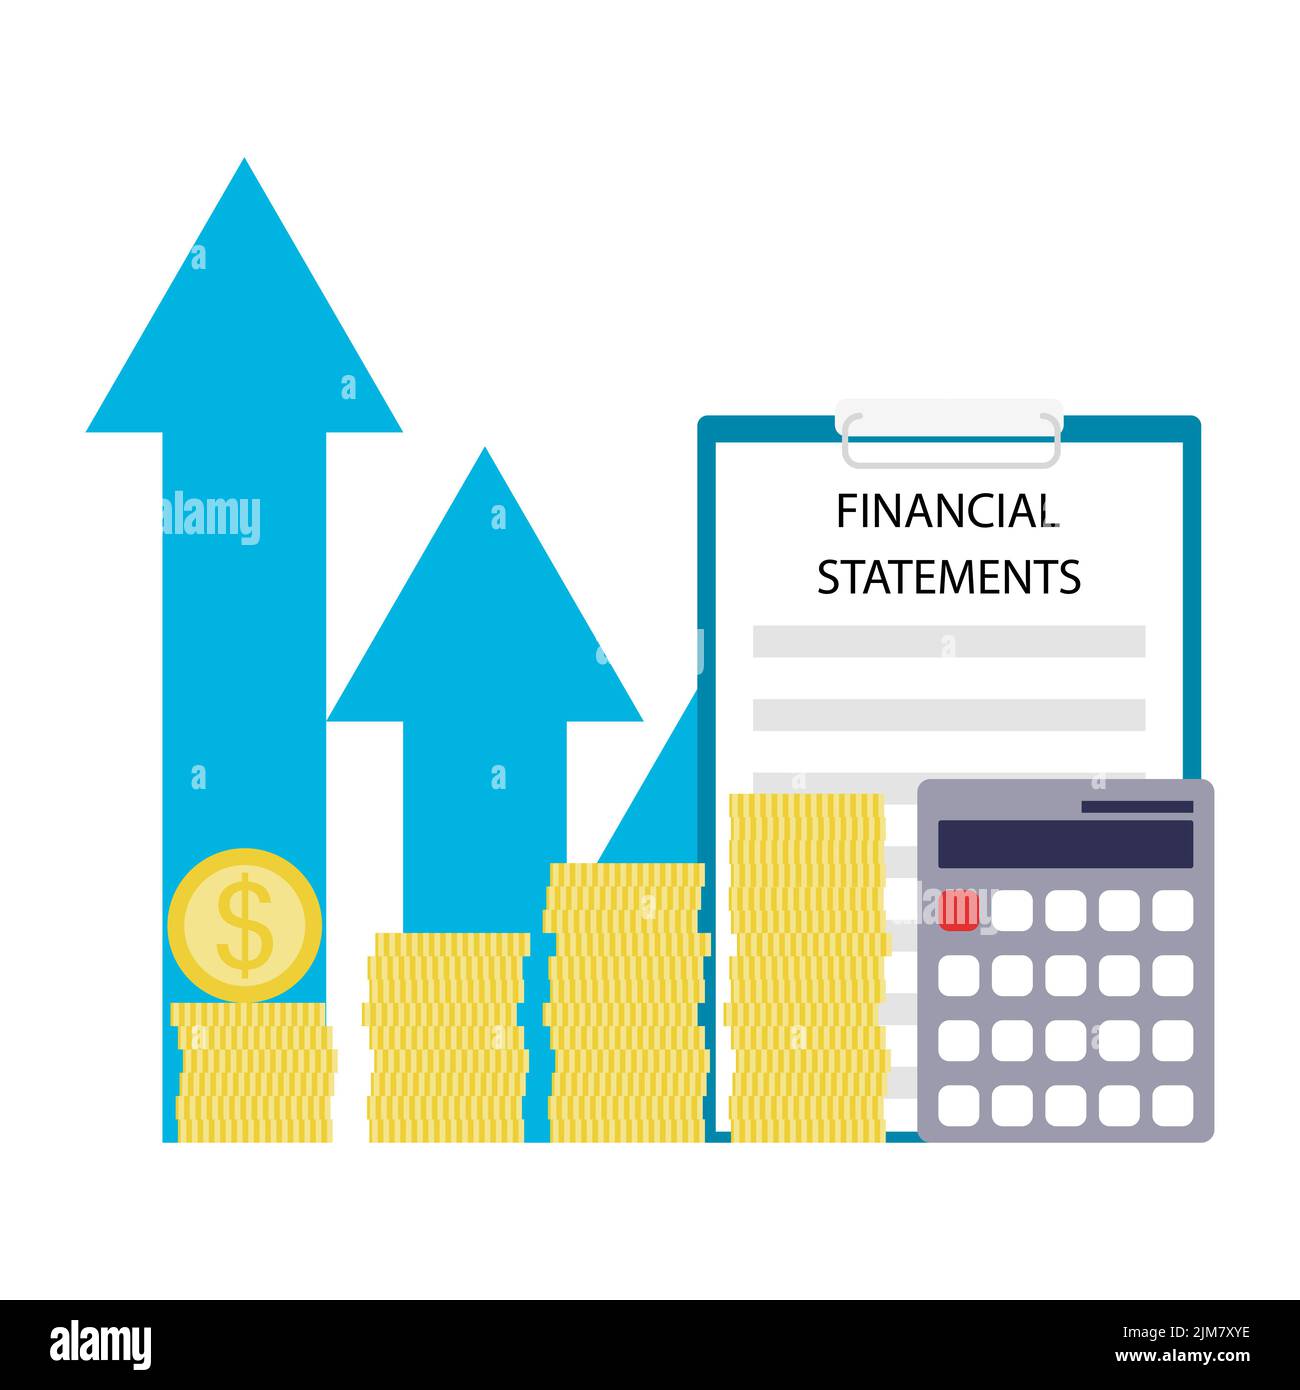 Financial statement, development business, increase budget and growth startup. Vector illustration. Development report, payment analyze, data review, Stock Photo